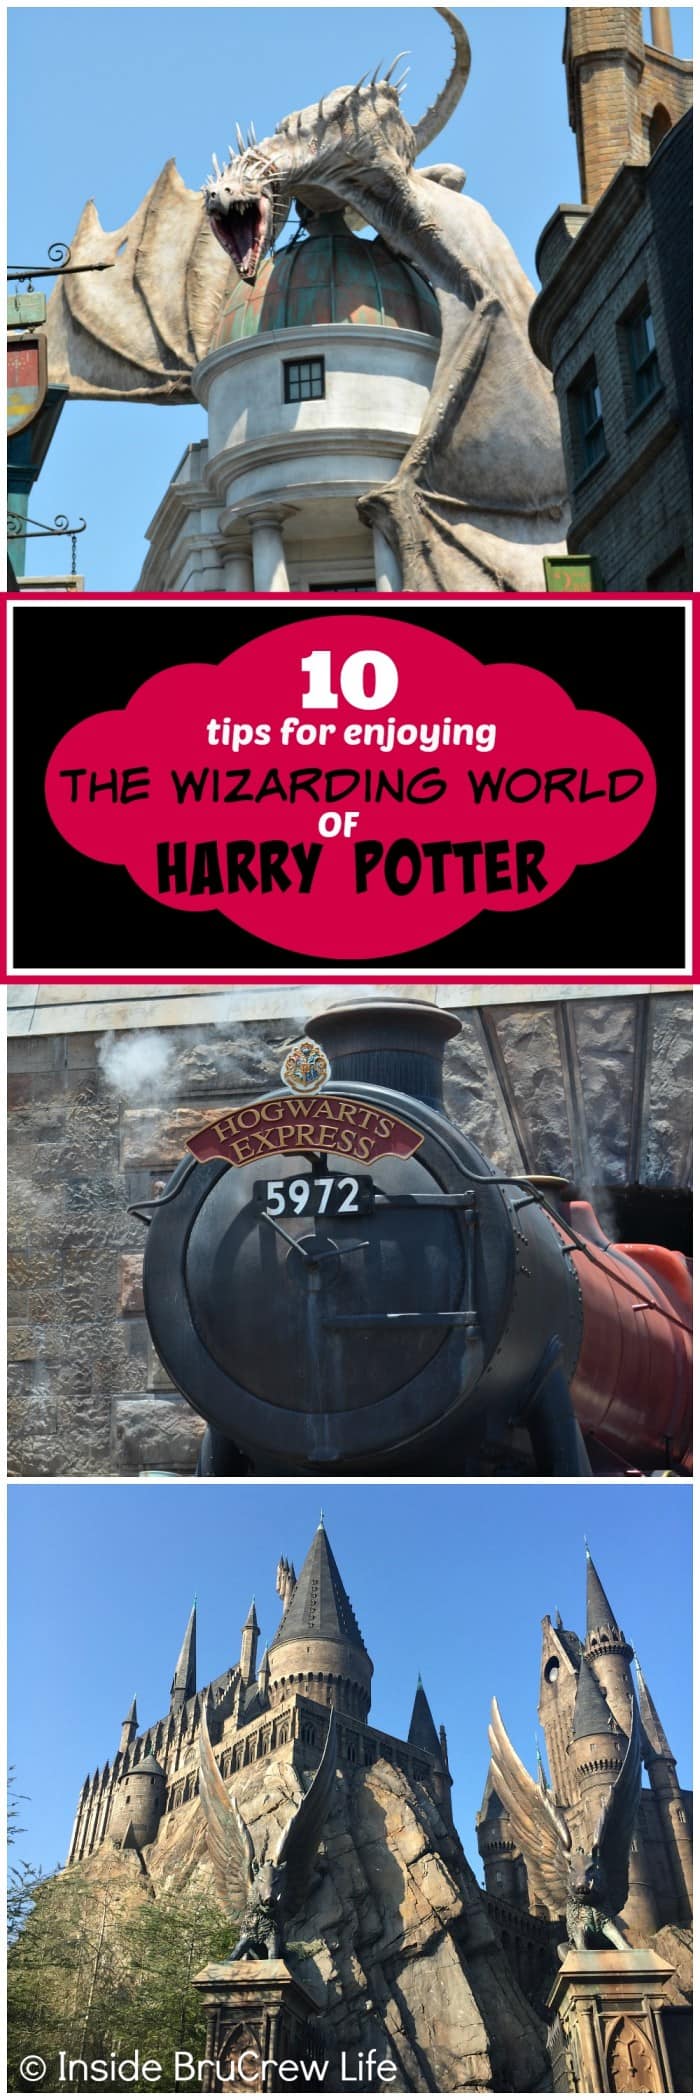 Tips for Enjoying the Wizarding World of Harry Potter - these easy tips will come in handy as you brave the lines and heat at the theme parks